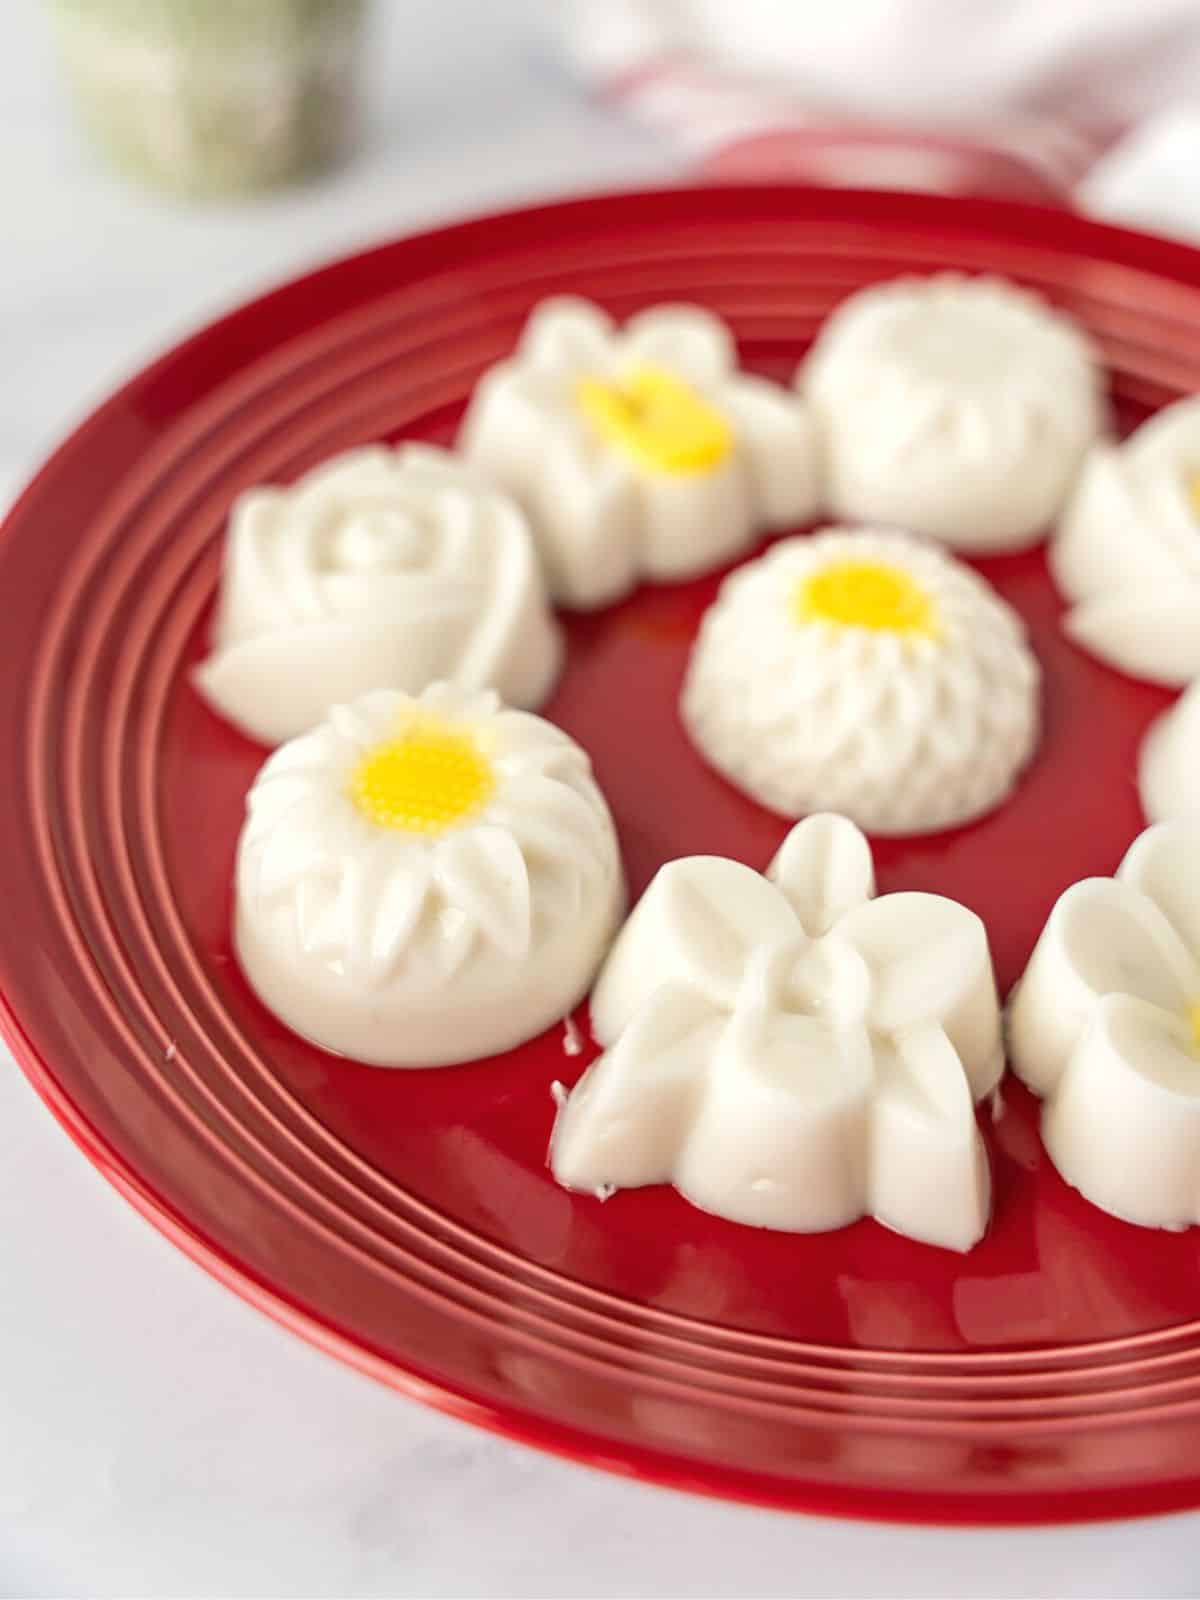 Mini coconut jelly in a flower mold on a red plate.